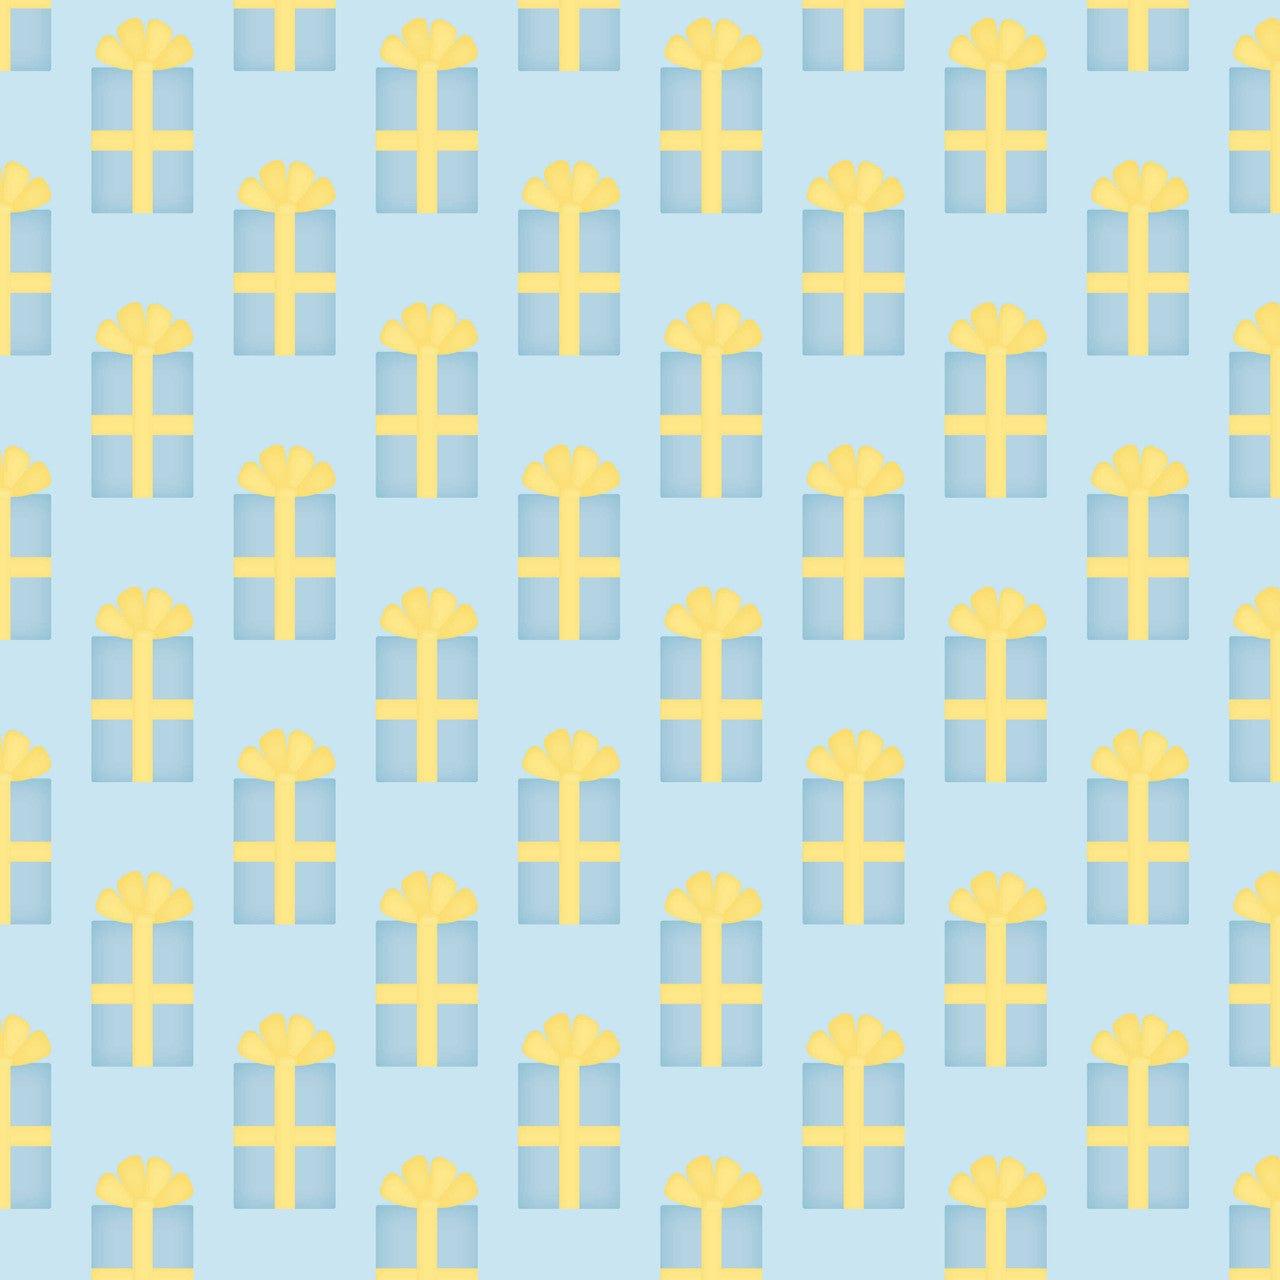 Ready To Pop Collection Baby Shower Boy 12 x 12 Double-Sided Scrapbook Paper by SSC Designs - Scrapbook Supply Companies